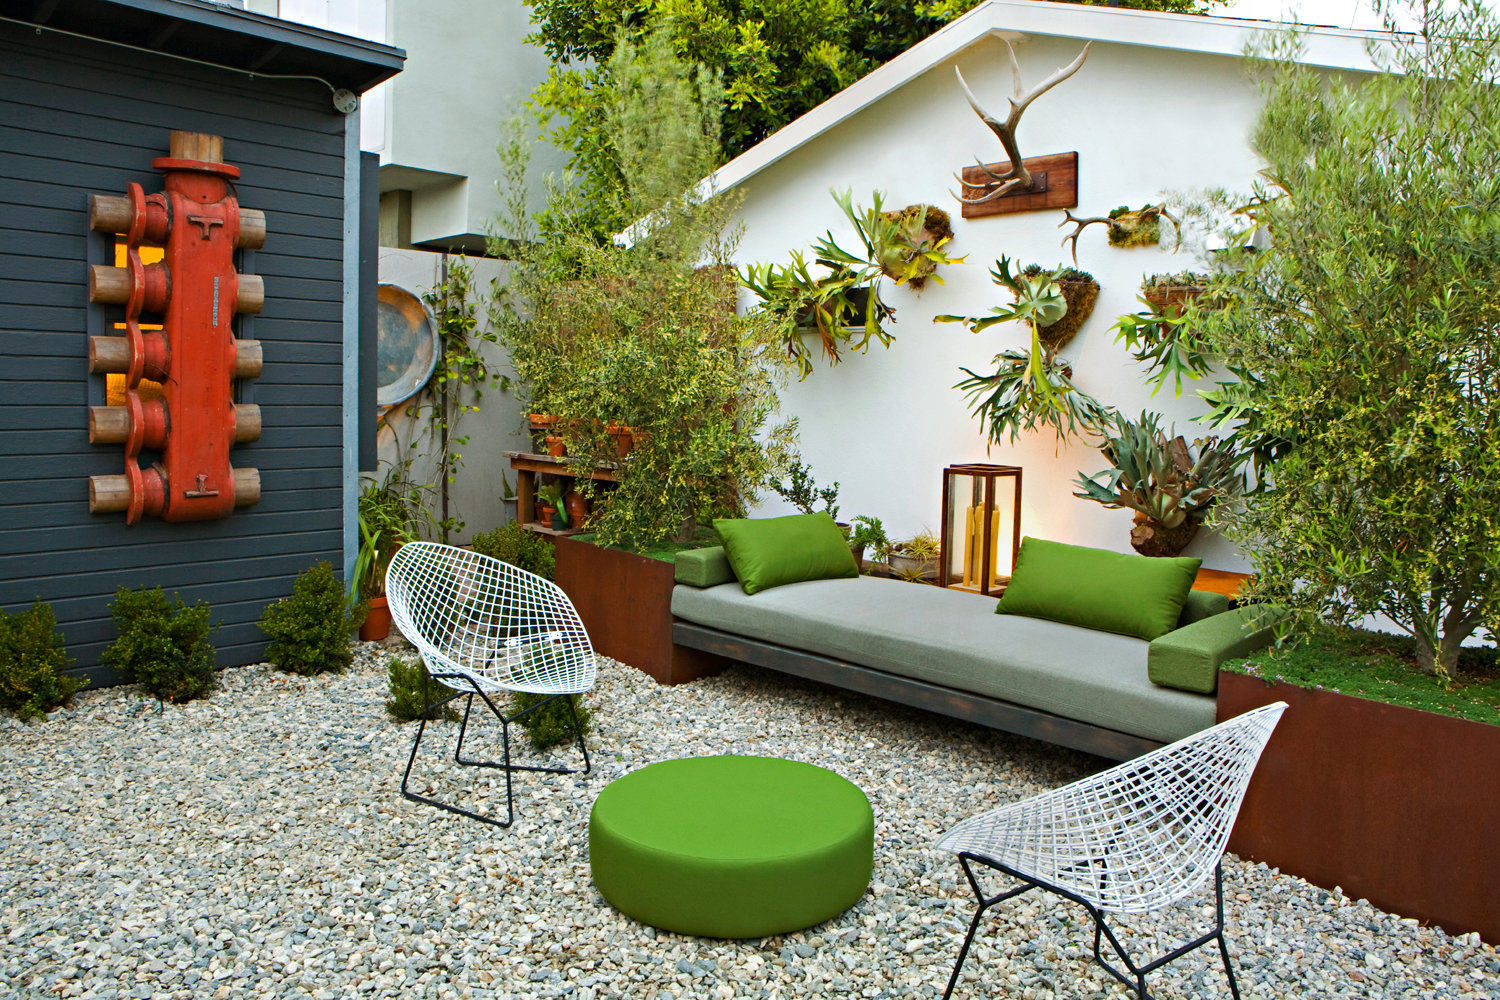 Big Style for Small Yards Design Ideas to Transform Tiny Spaces ...